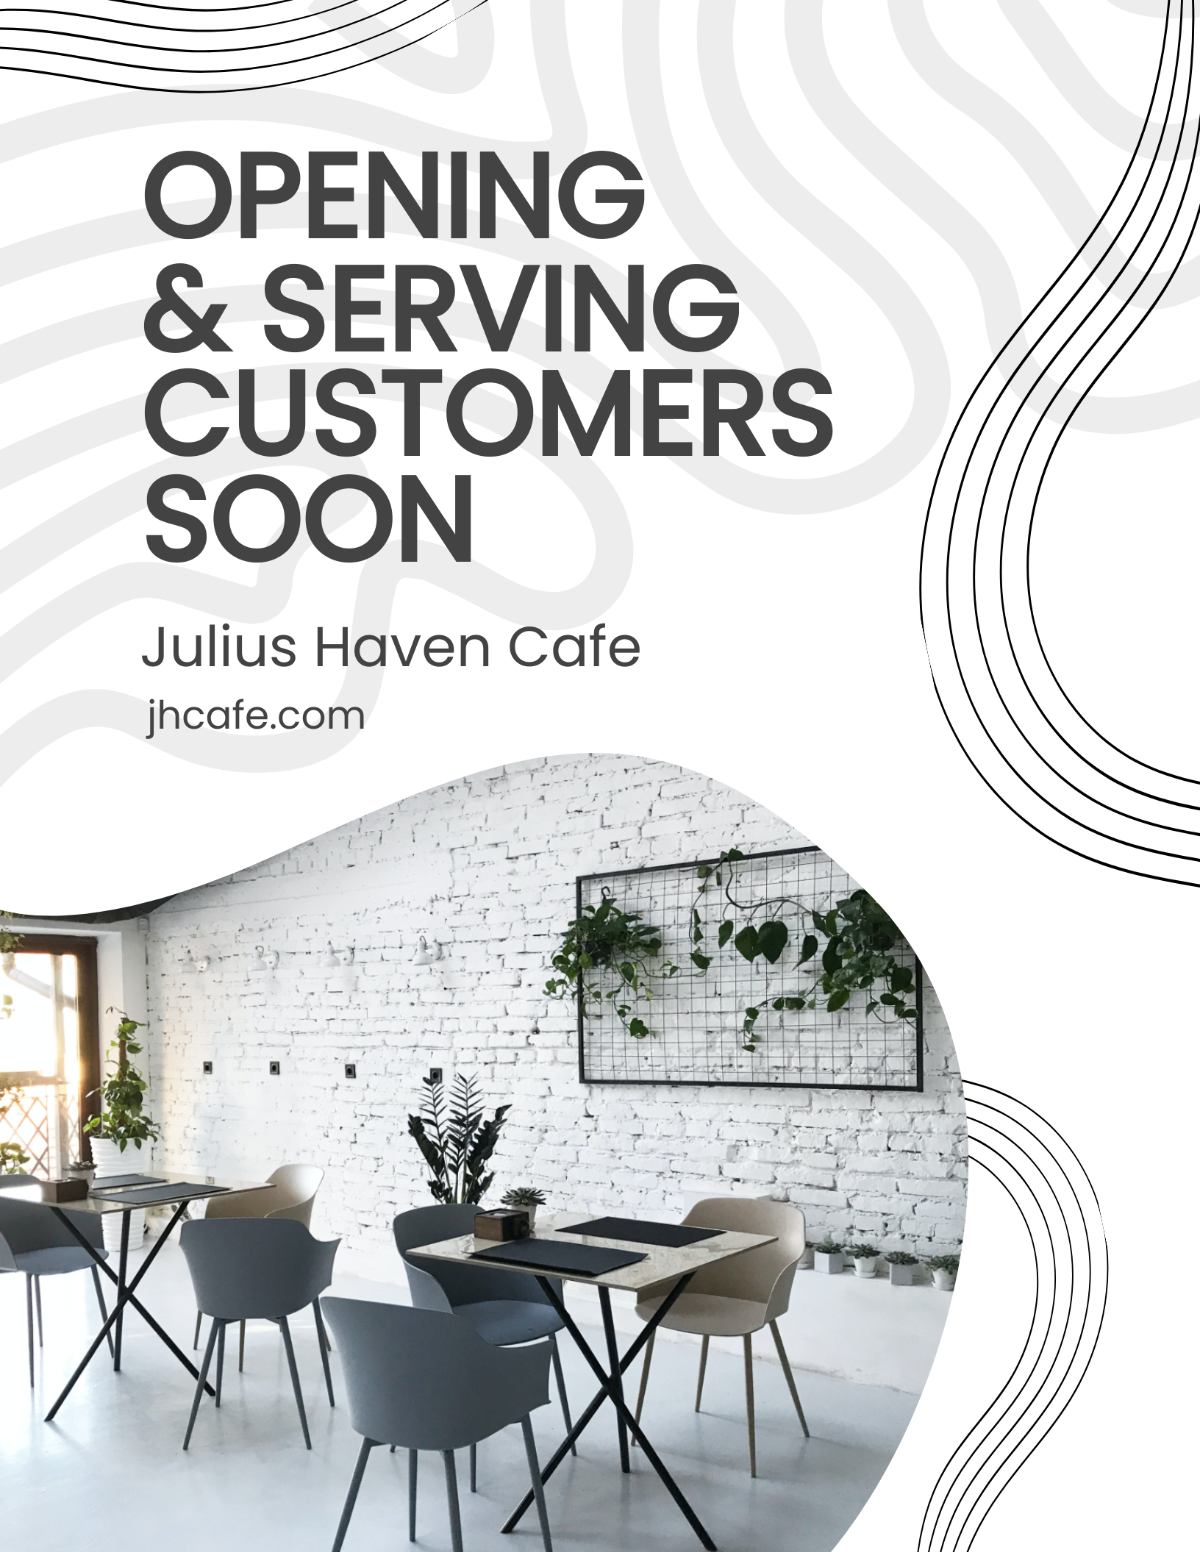 Cafe Opening Announcement Flyer Template